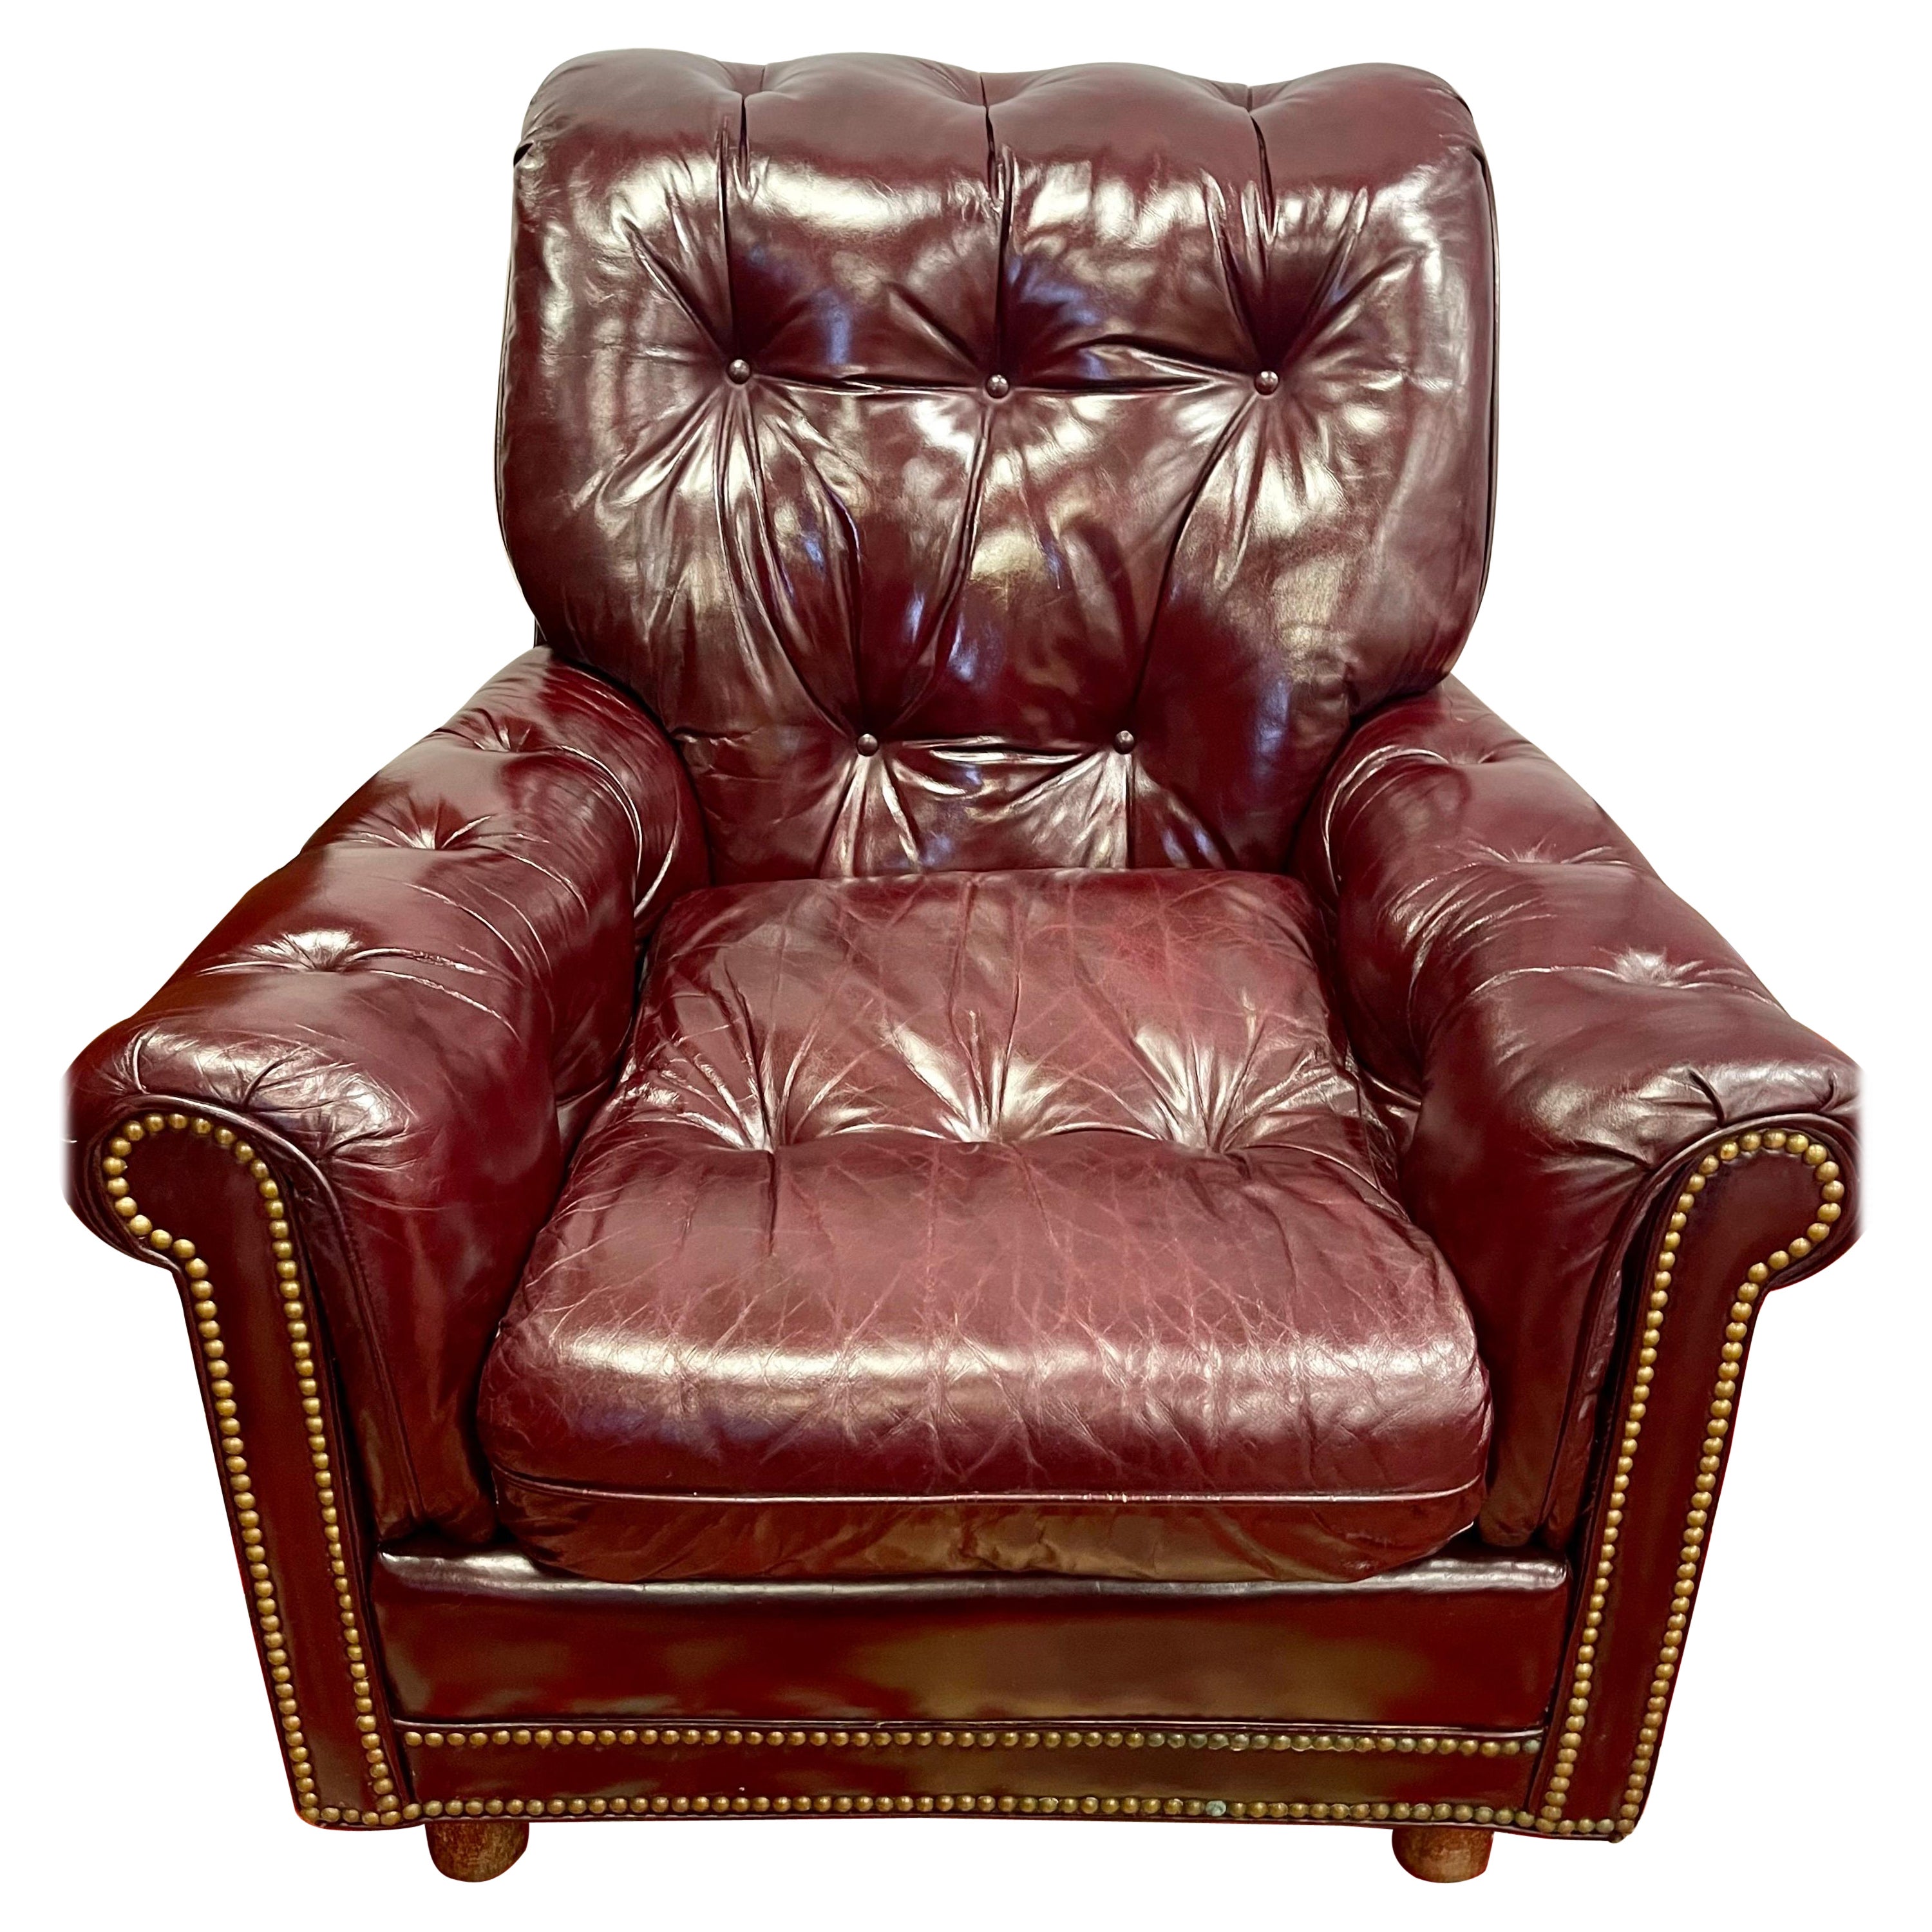 Hancock & Moore Vintage Cranberry Leather Tufted Nailhead Armchair Chair